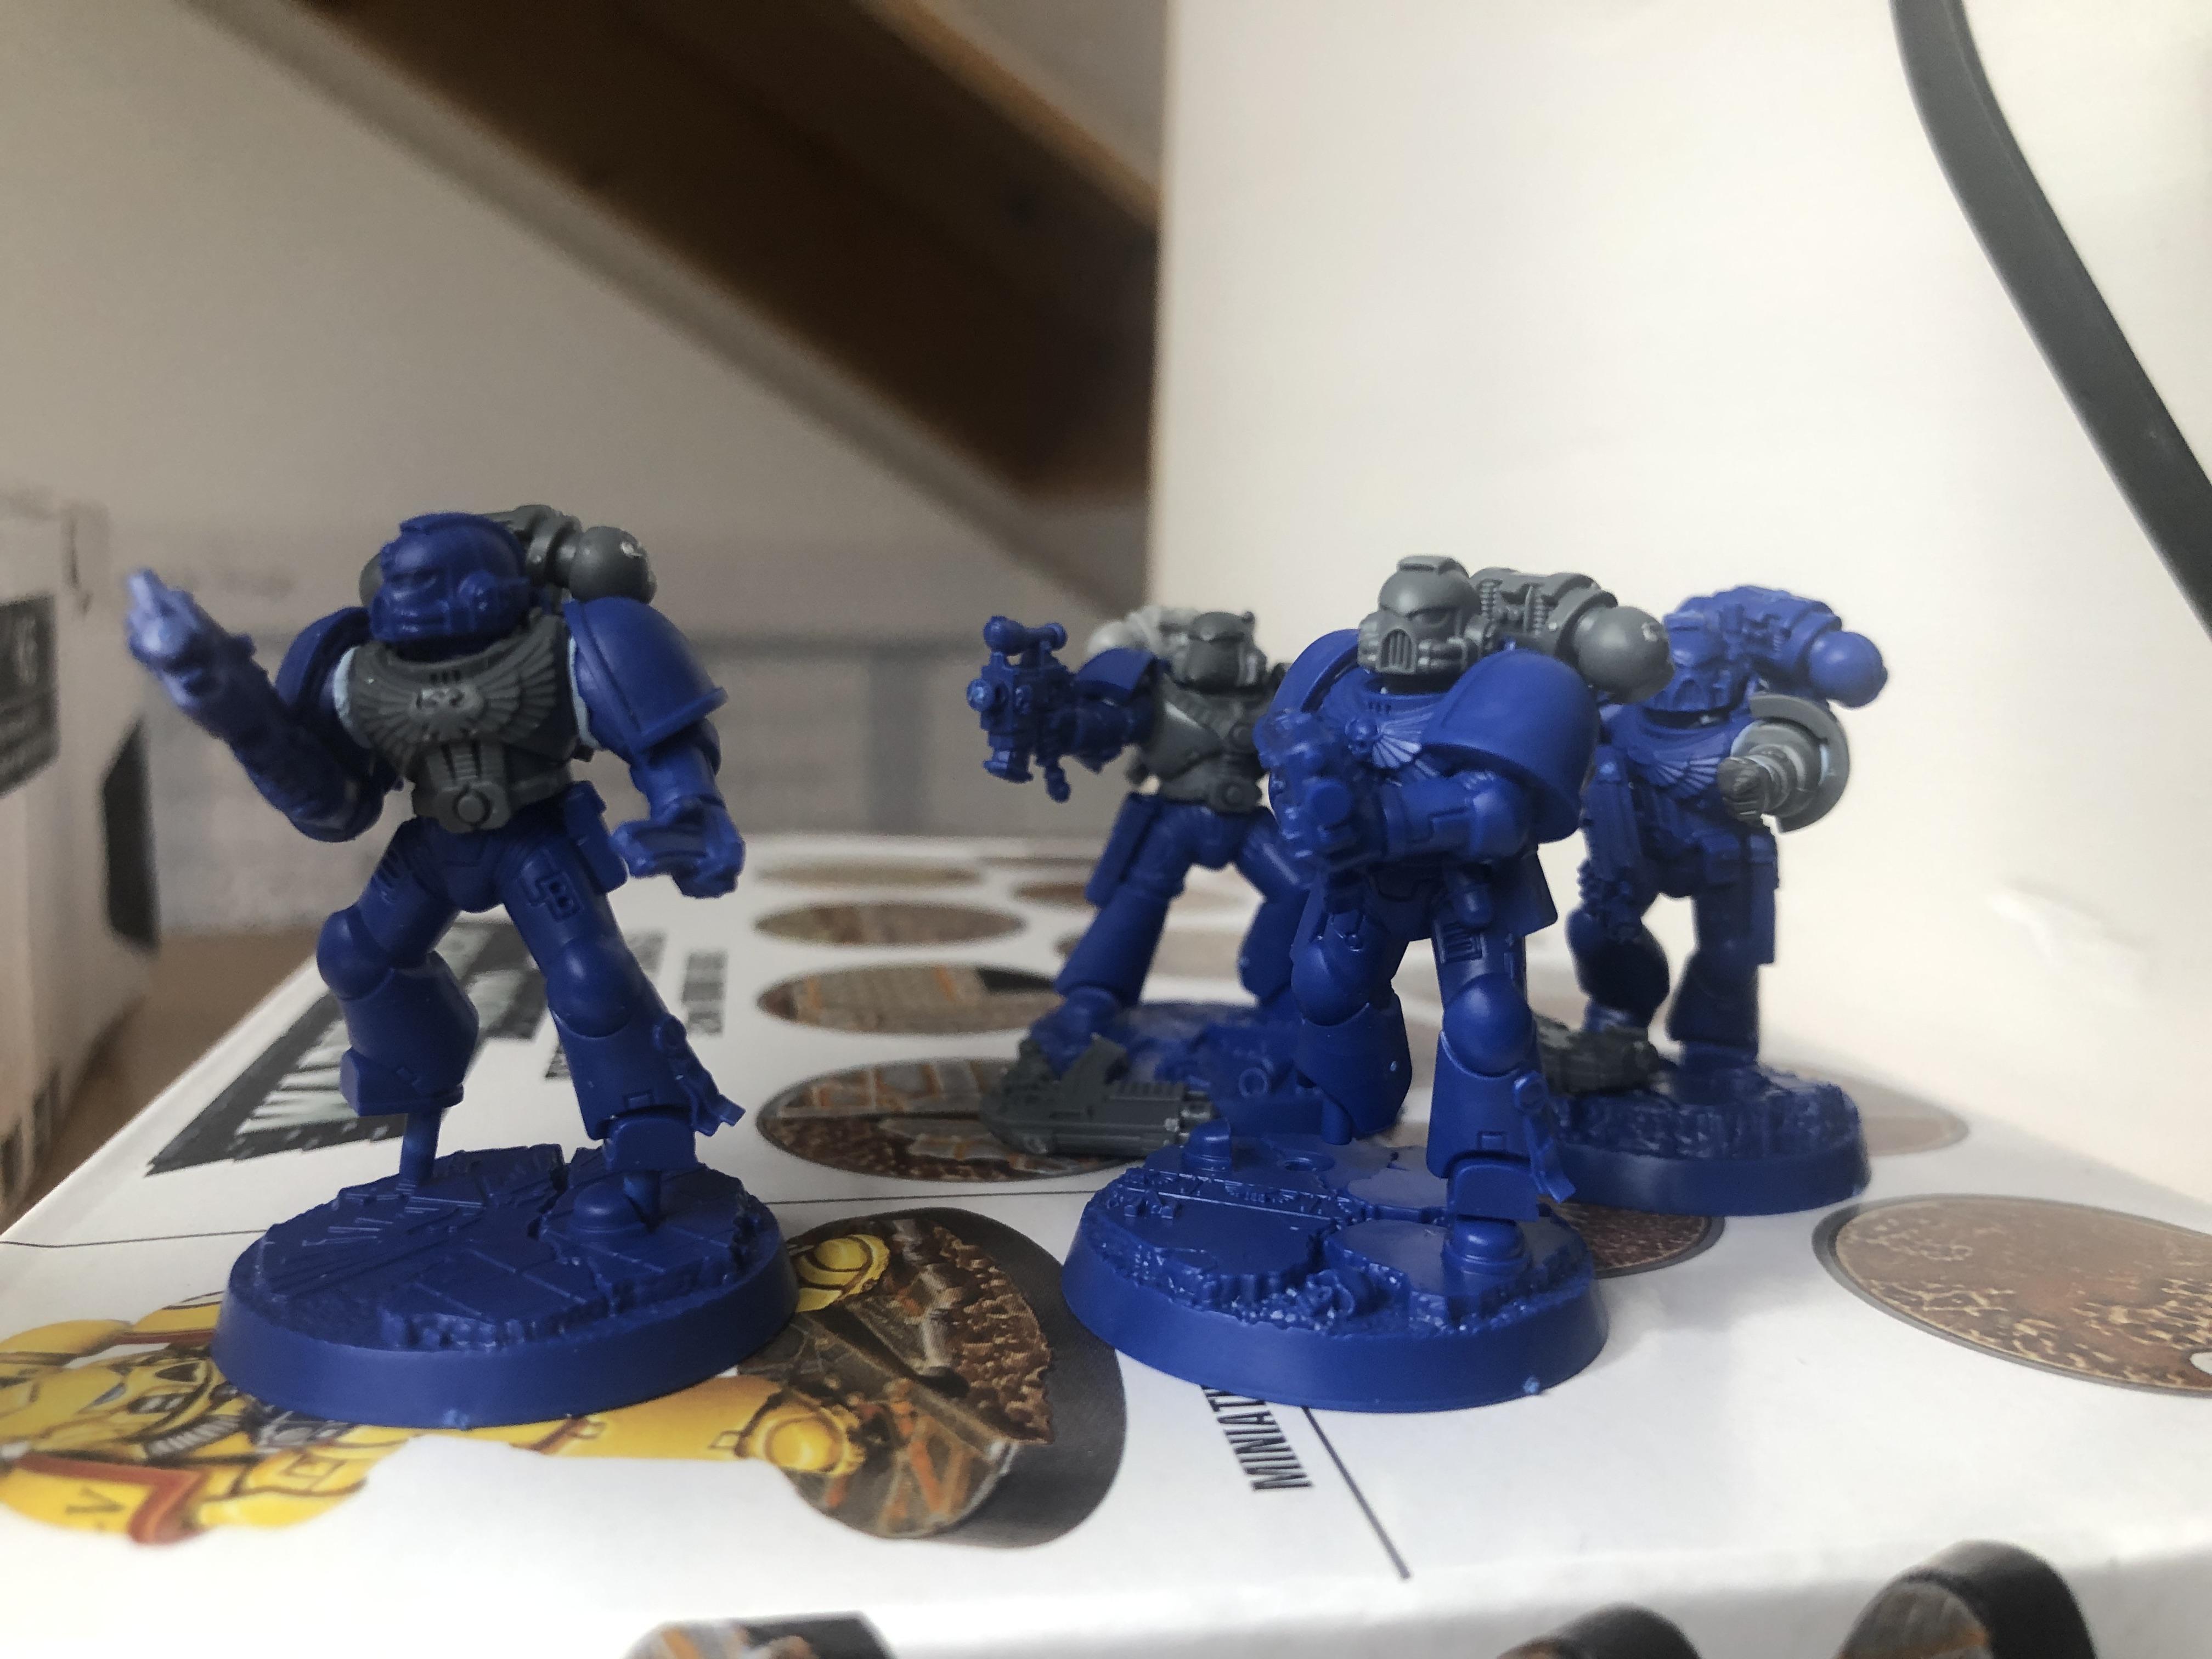 Kitbash Series 1 Space Marine Heroes Space Marines Tactical Squad L Warhammer 40 000 Wil Gallery Dakkadakka Roll The Dice To See If I M Getting Drunk